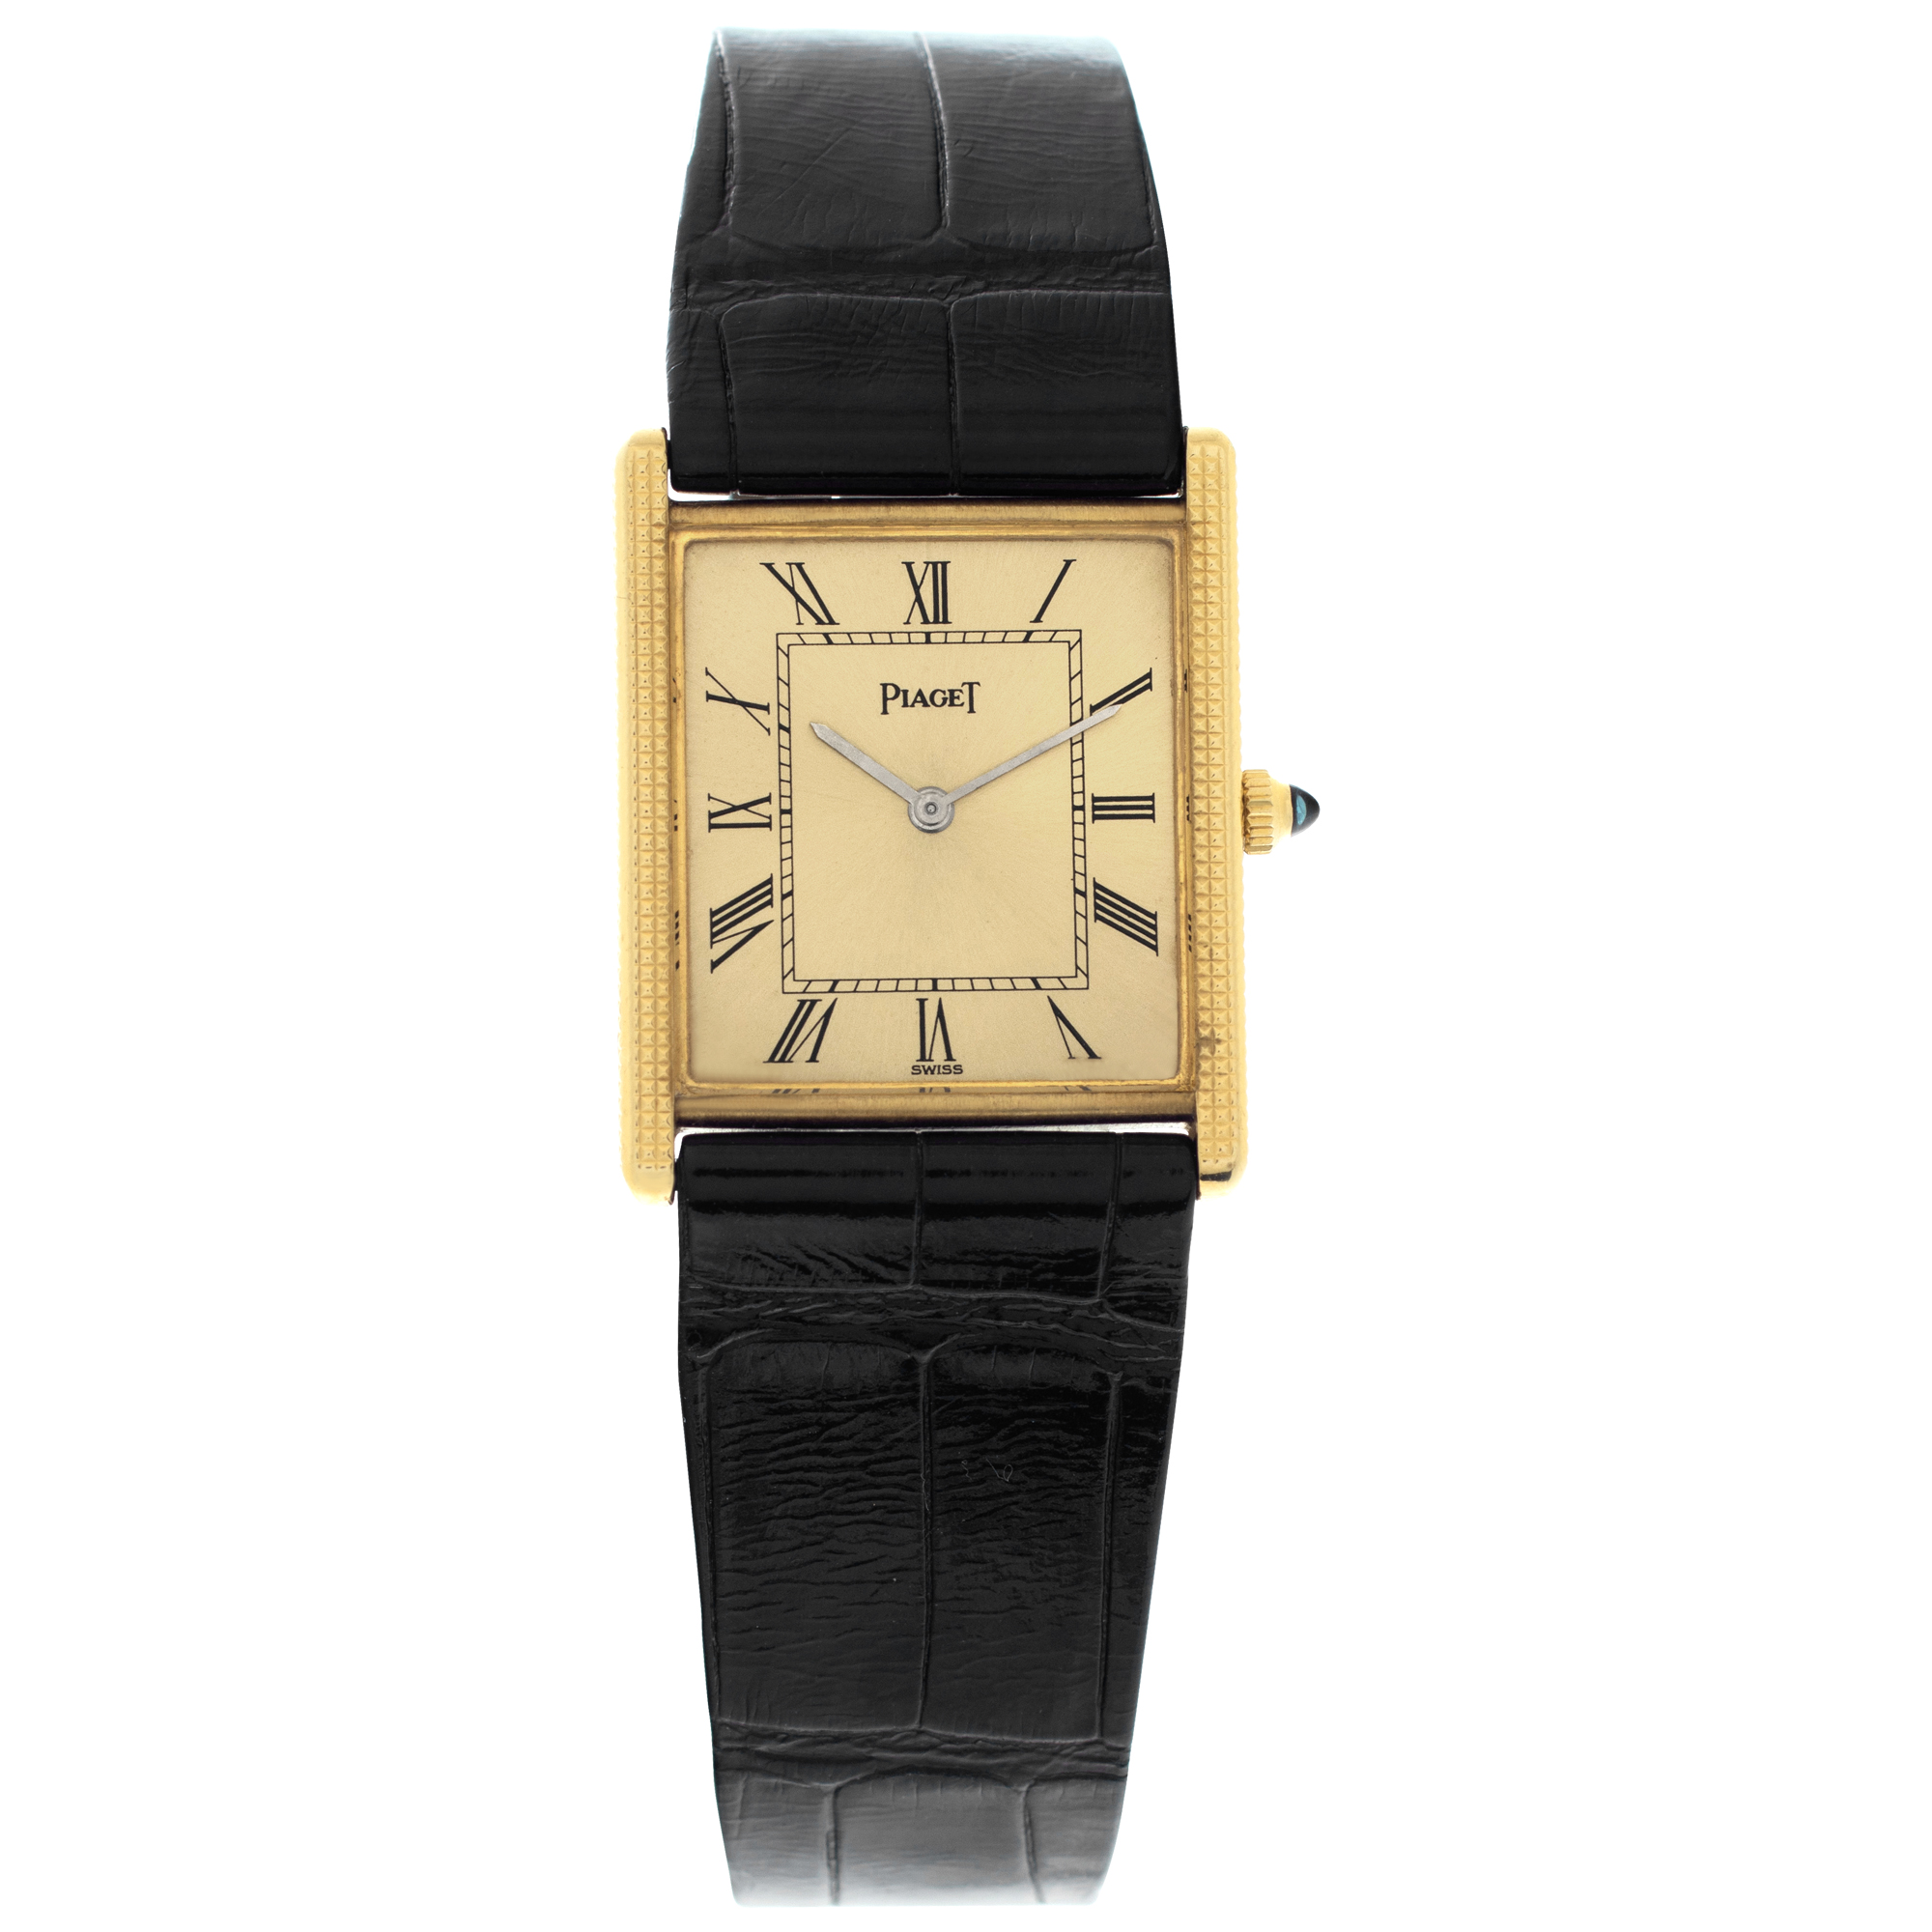 Piaget Classic 23mm 9294 image 1